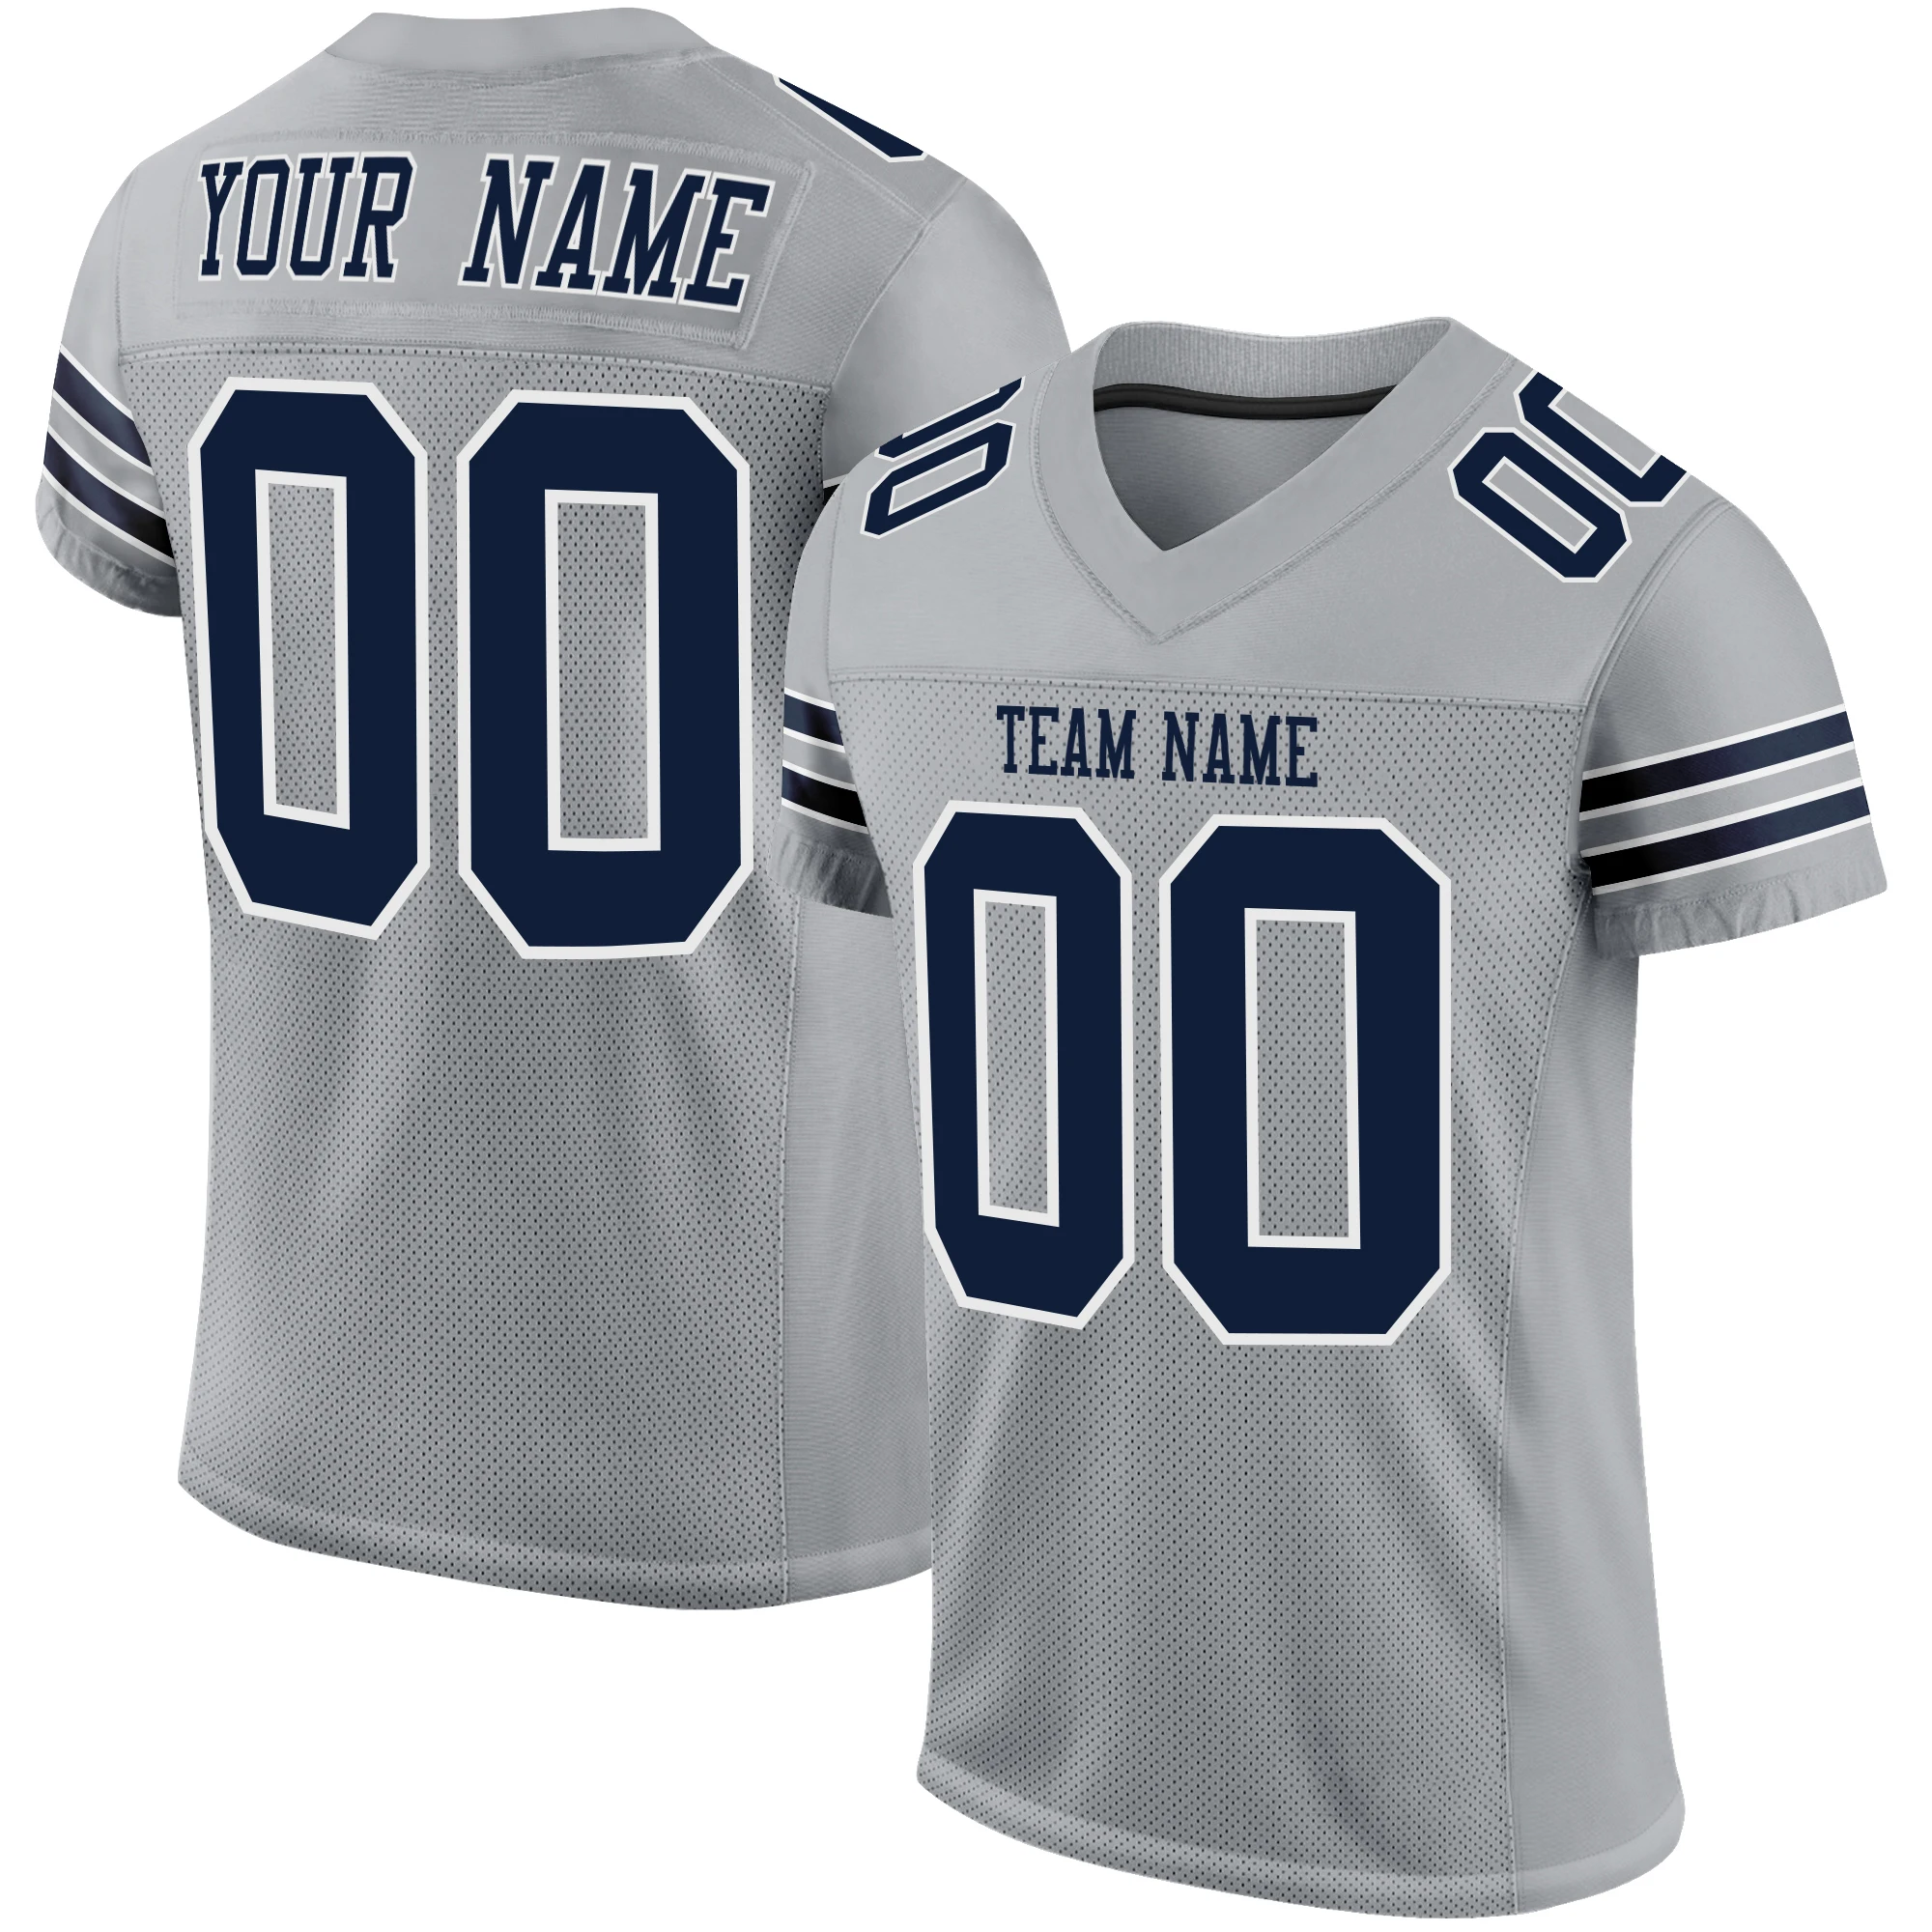 Custom American Football Jersey Personalized Printing Team Name Number Logo Rugby Jerseys Game Training Shirt for Men/Youth